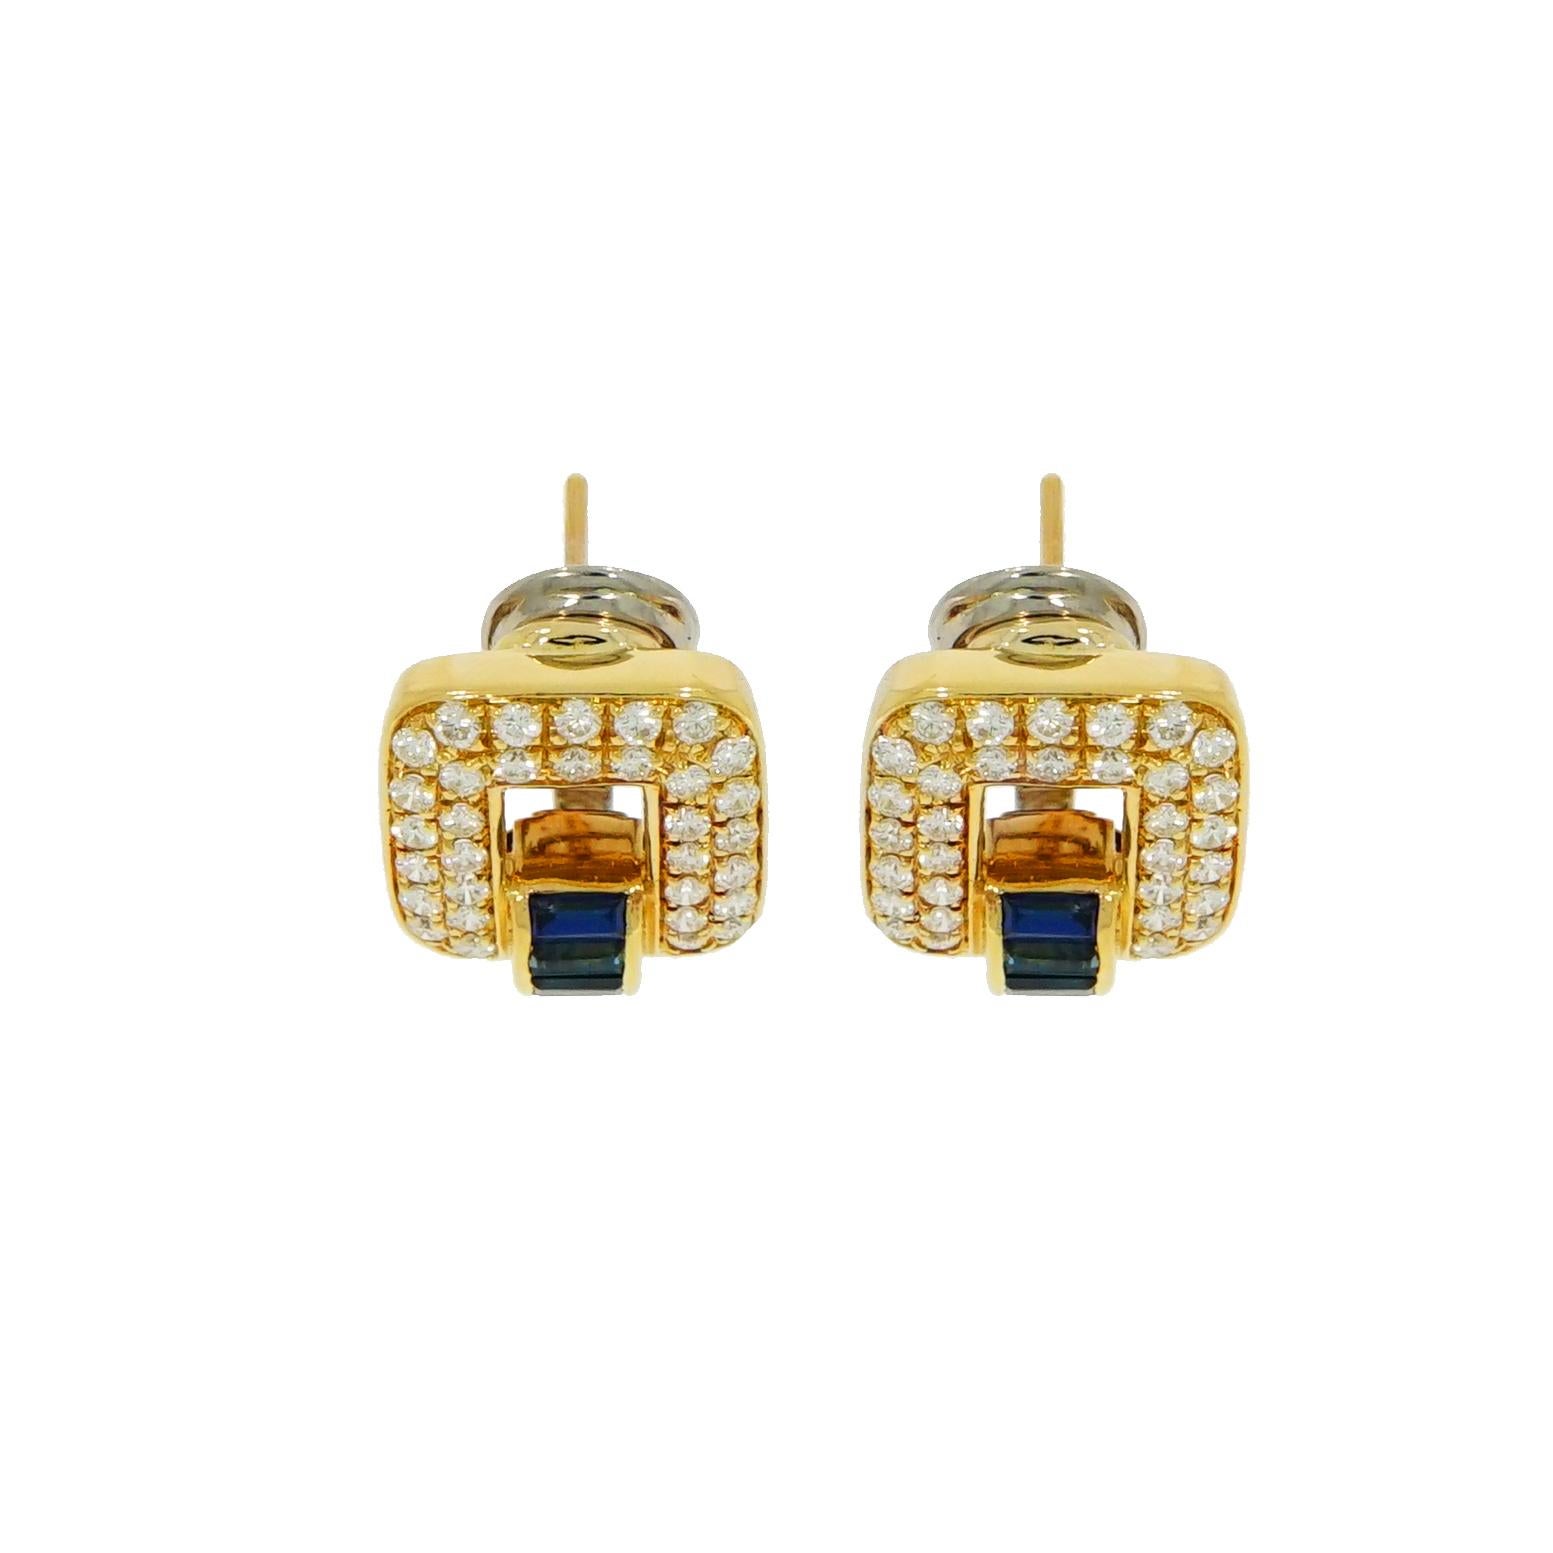 Rich and sophisticated in design, this striking pair of earrings is an excellent choice! Classic and refined this beauty will stand the test of time! Make it yours before it’s gone. 
Crafted in Italy in 18k Yellow Gold with 64 round diamonds